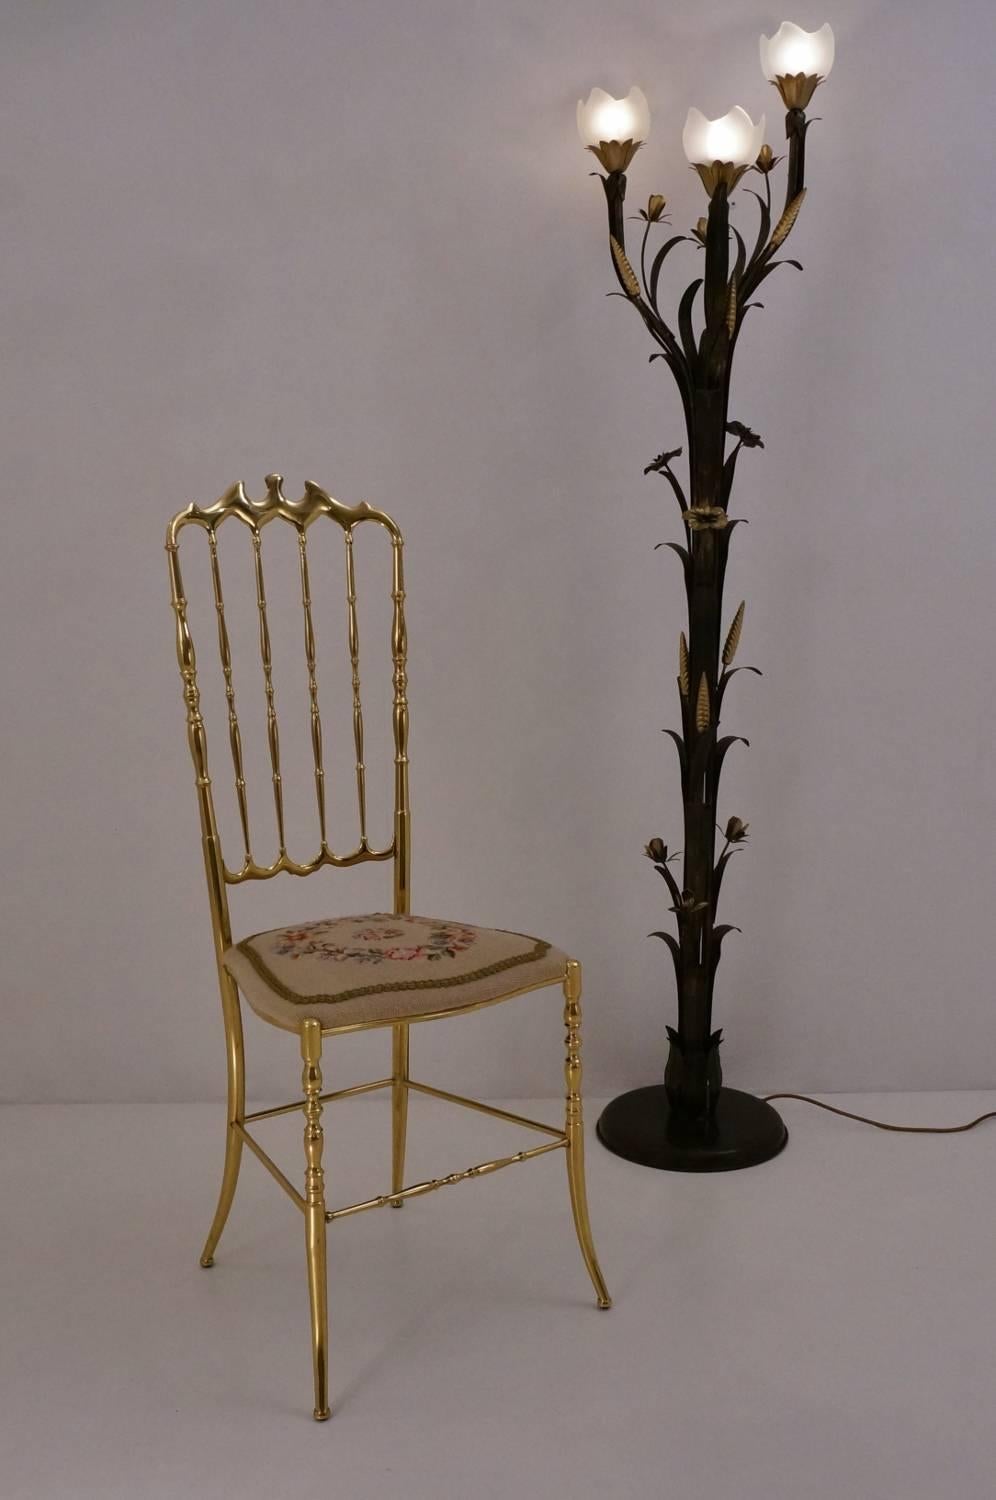 Neoclassical Chiavari Solid Brass Chair, Needle Point Seat and High Back, circa 1950s Italian